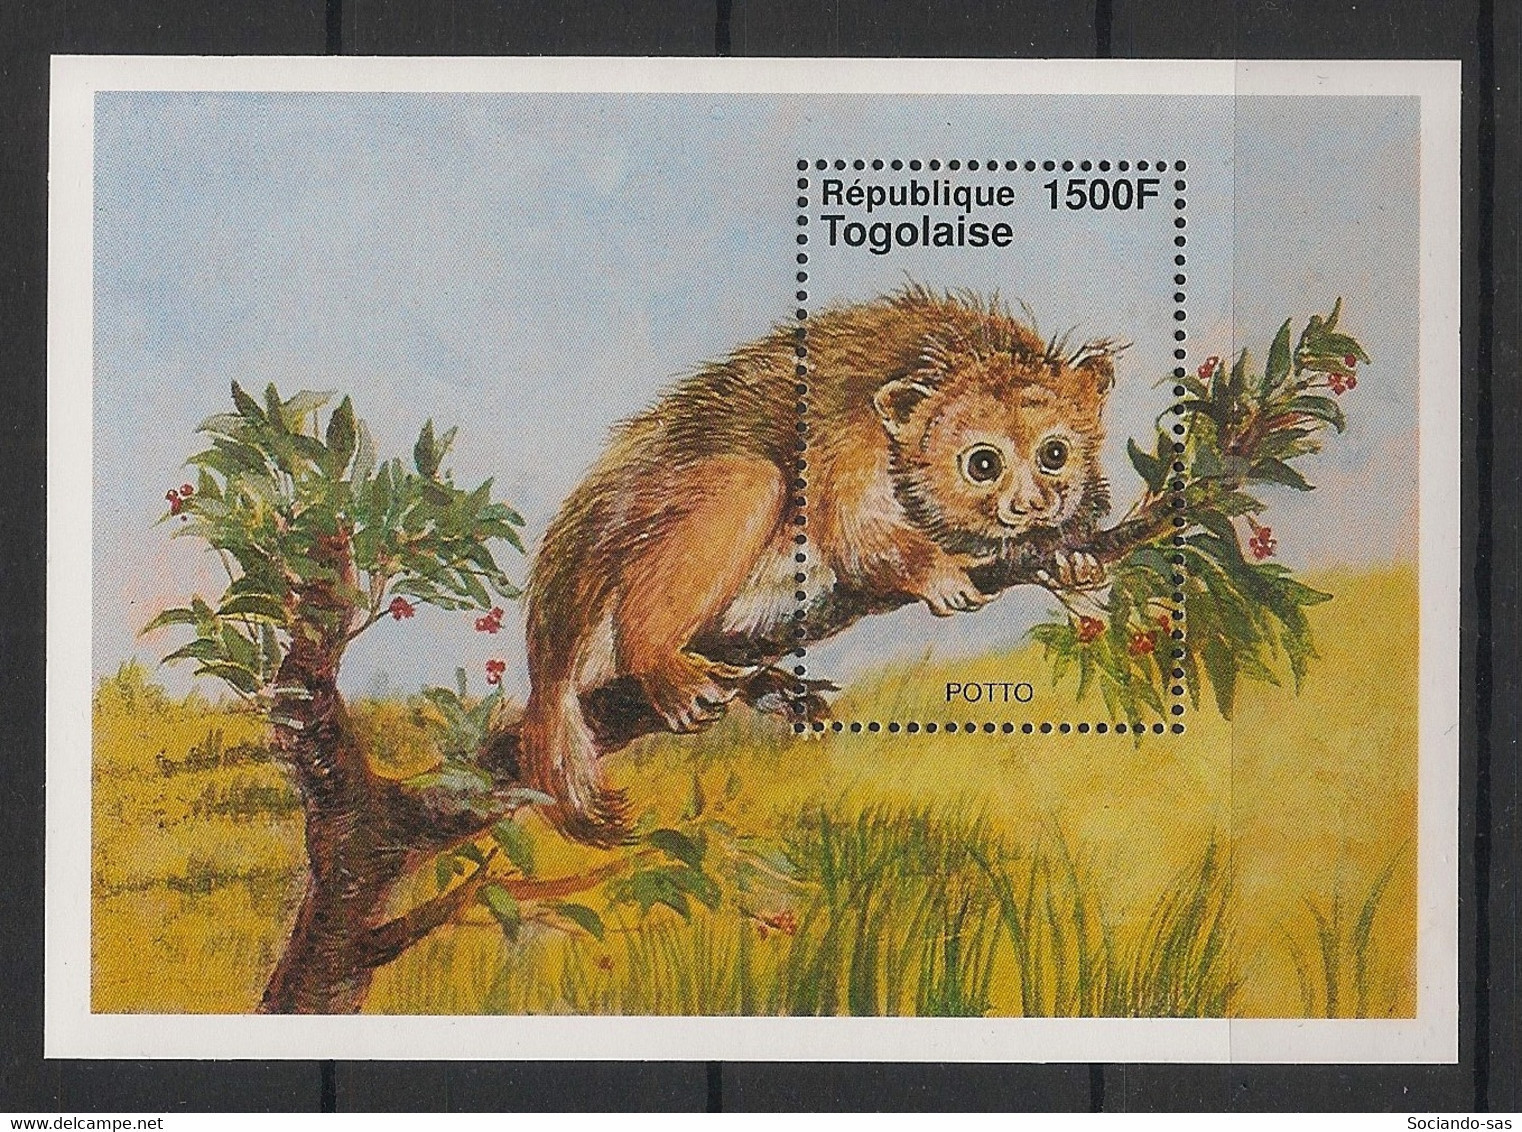 TOGO - 1996 - Bloc Feuillet BF N°YT. 303 - Faune / Potto - Neuf Luxe ** / MNH / Postfrisch - Rodents